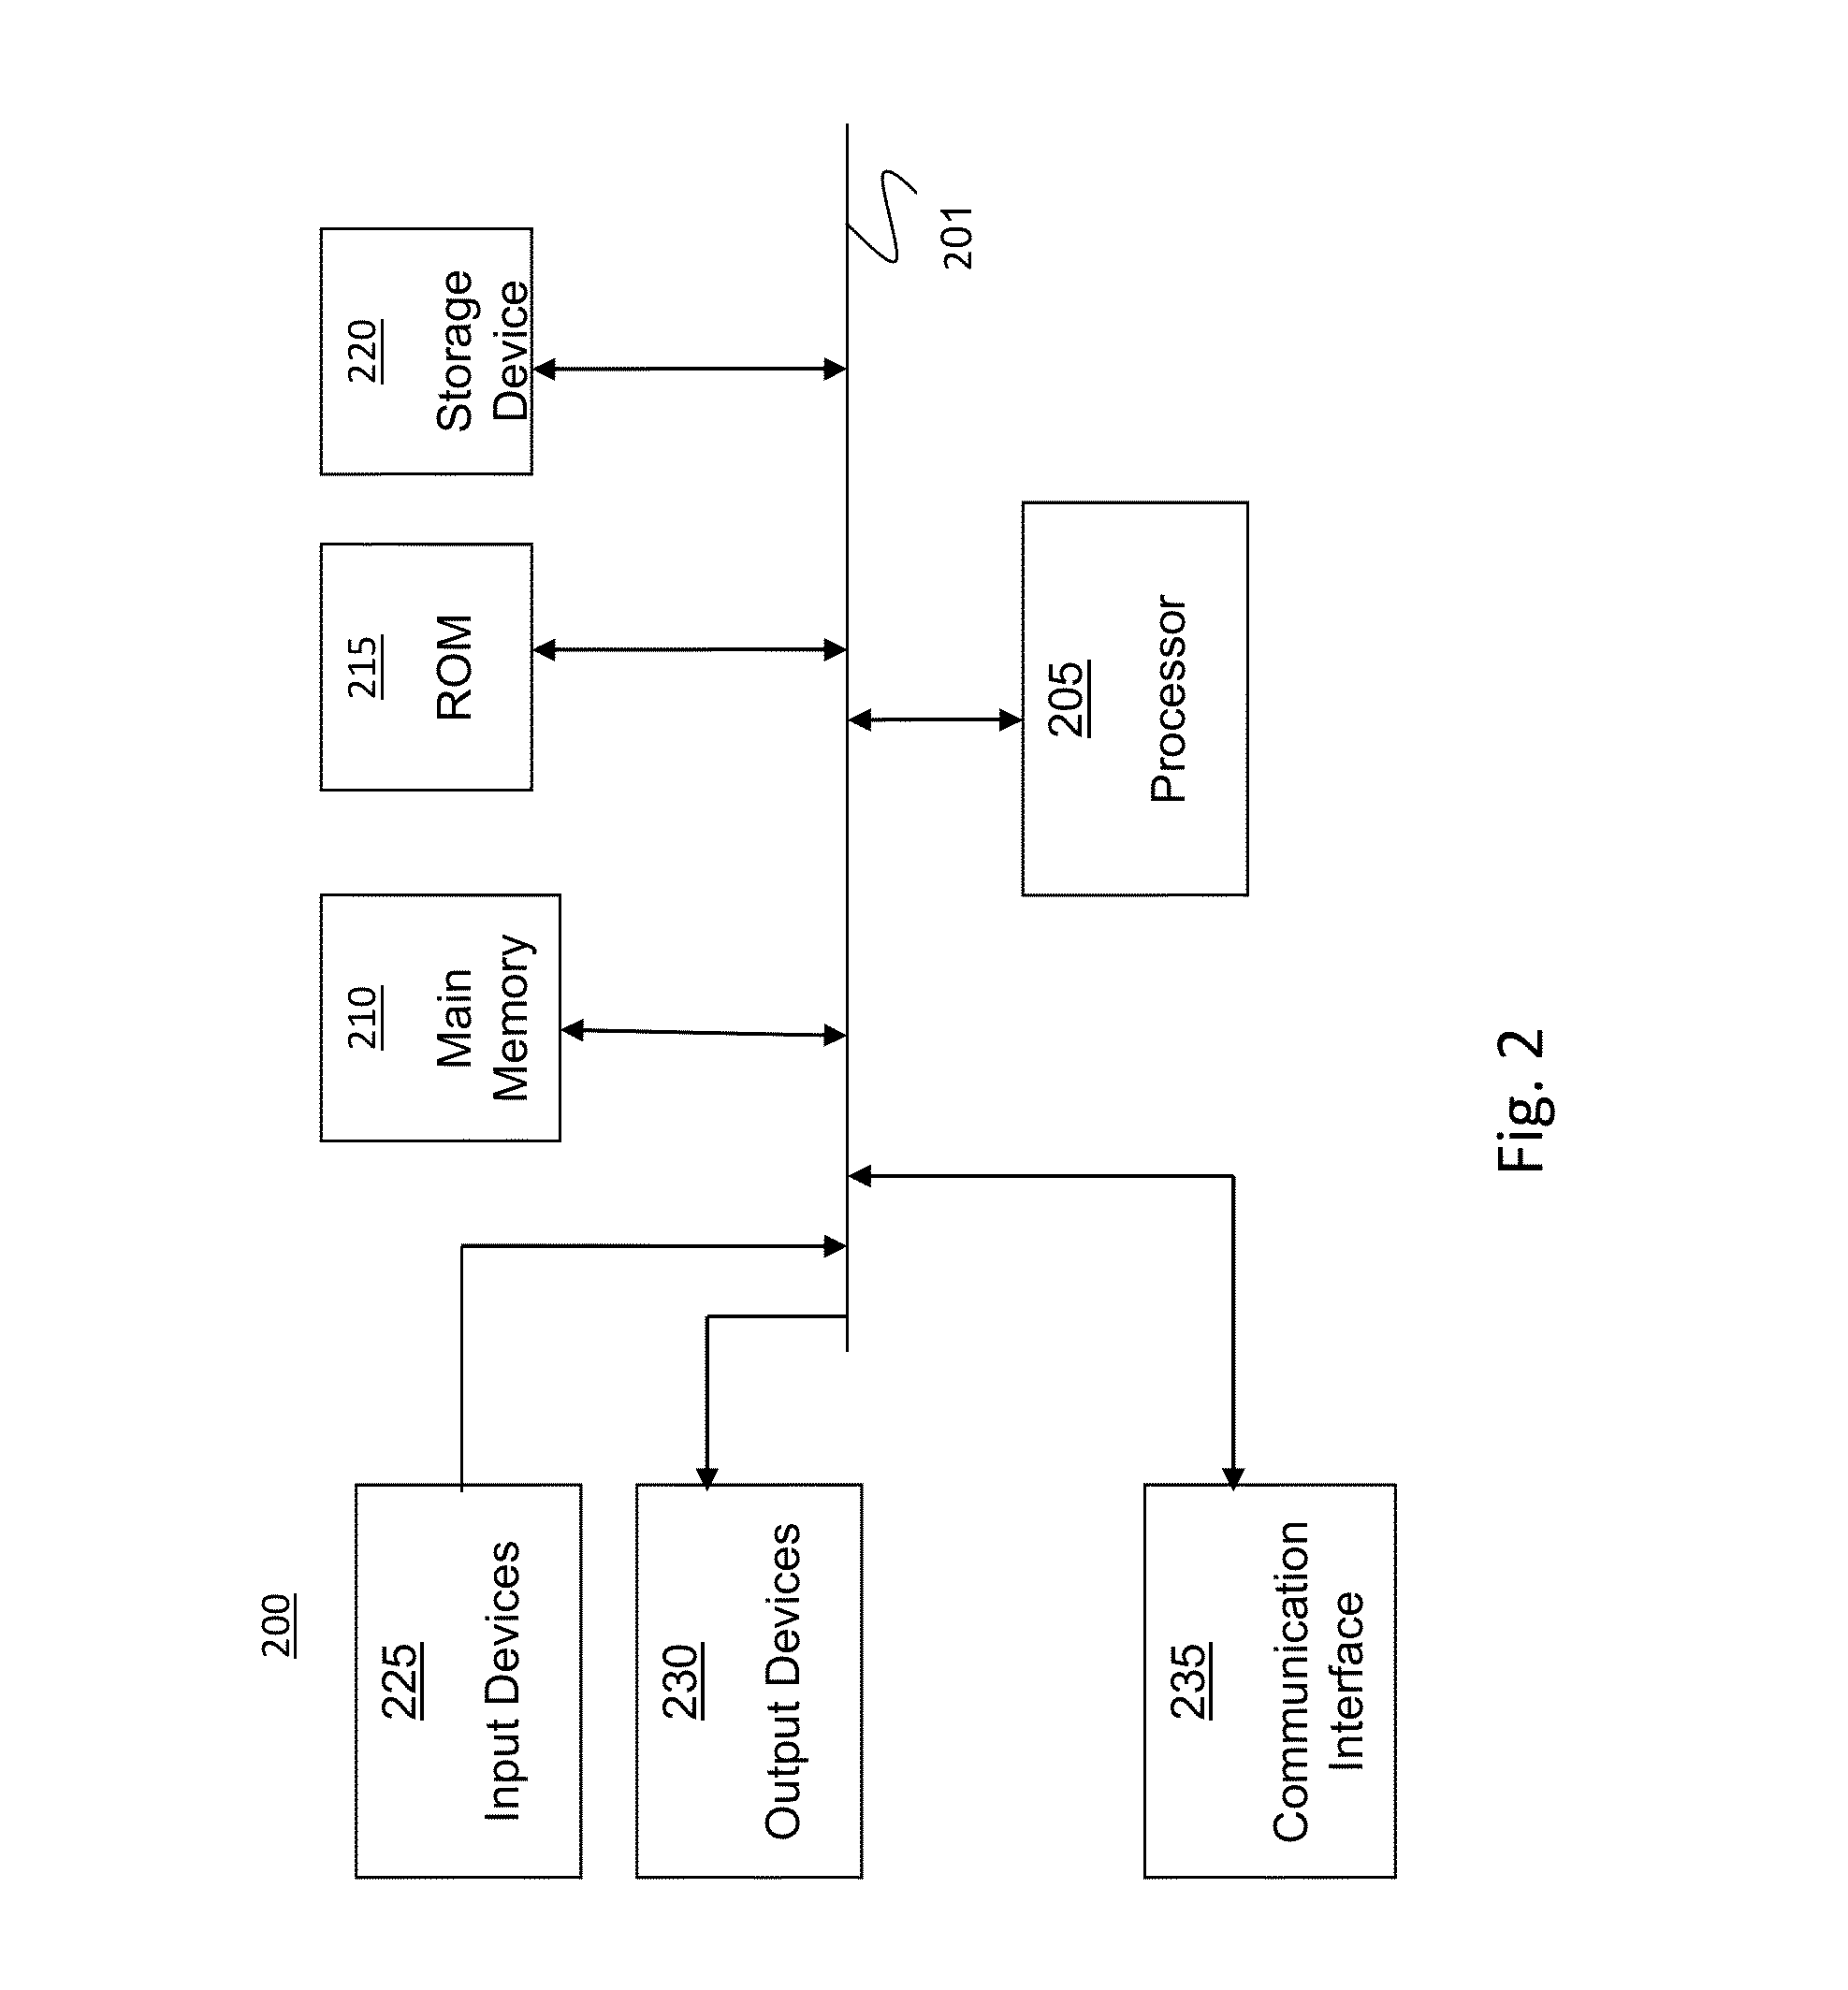 Method and System for Ontology Based Analytics